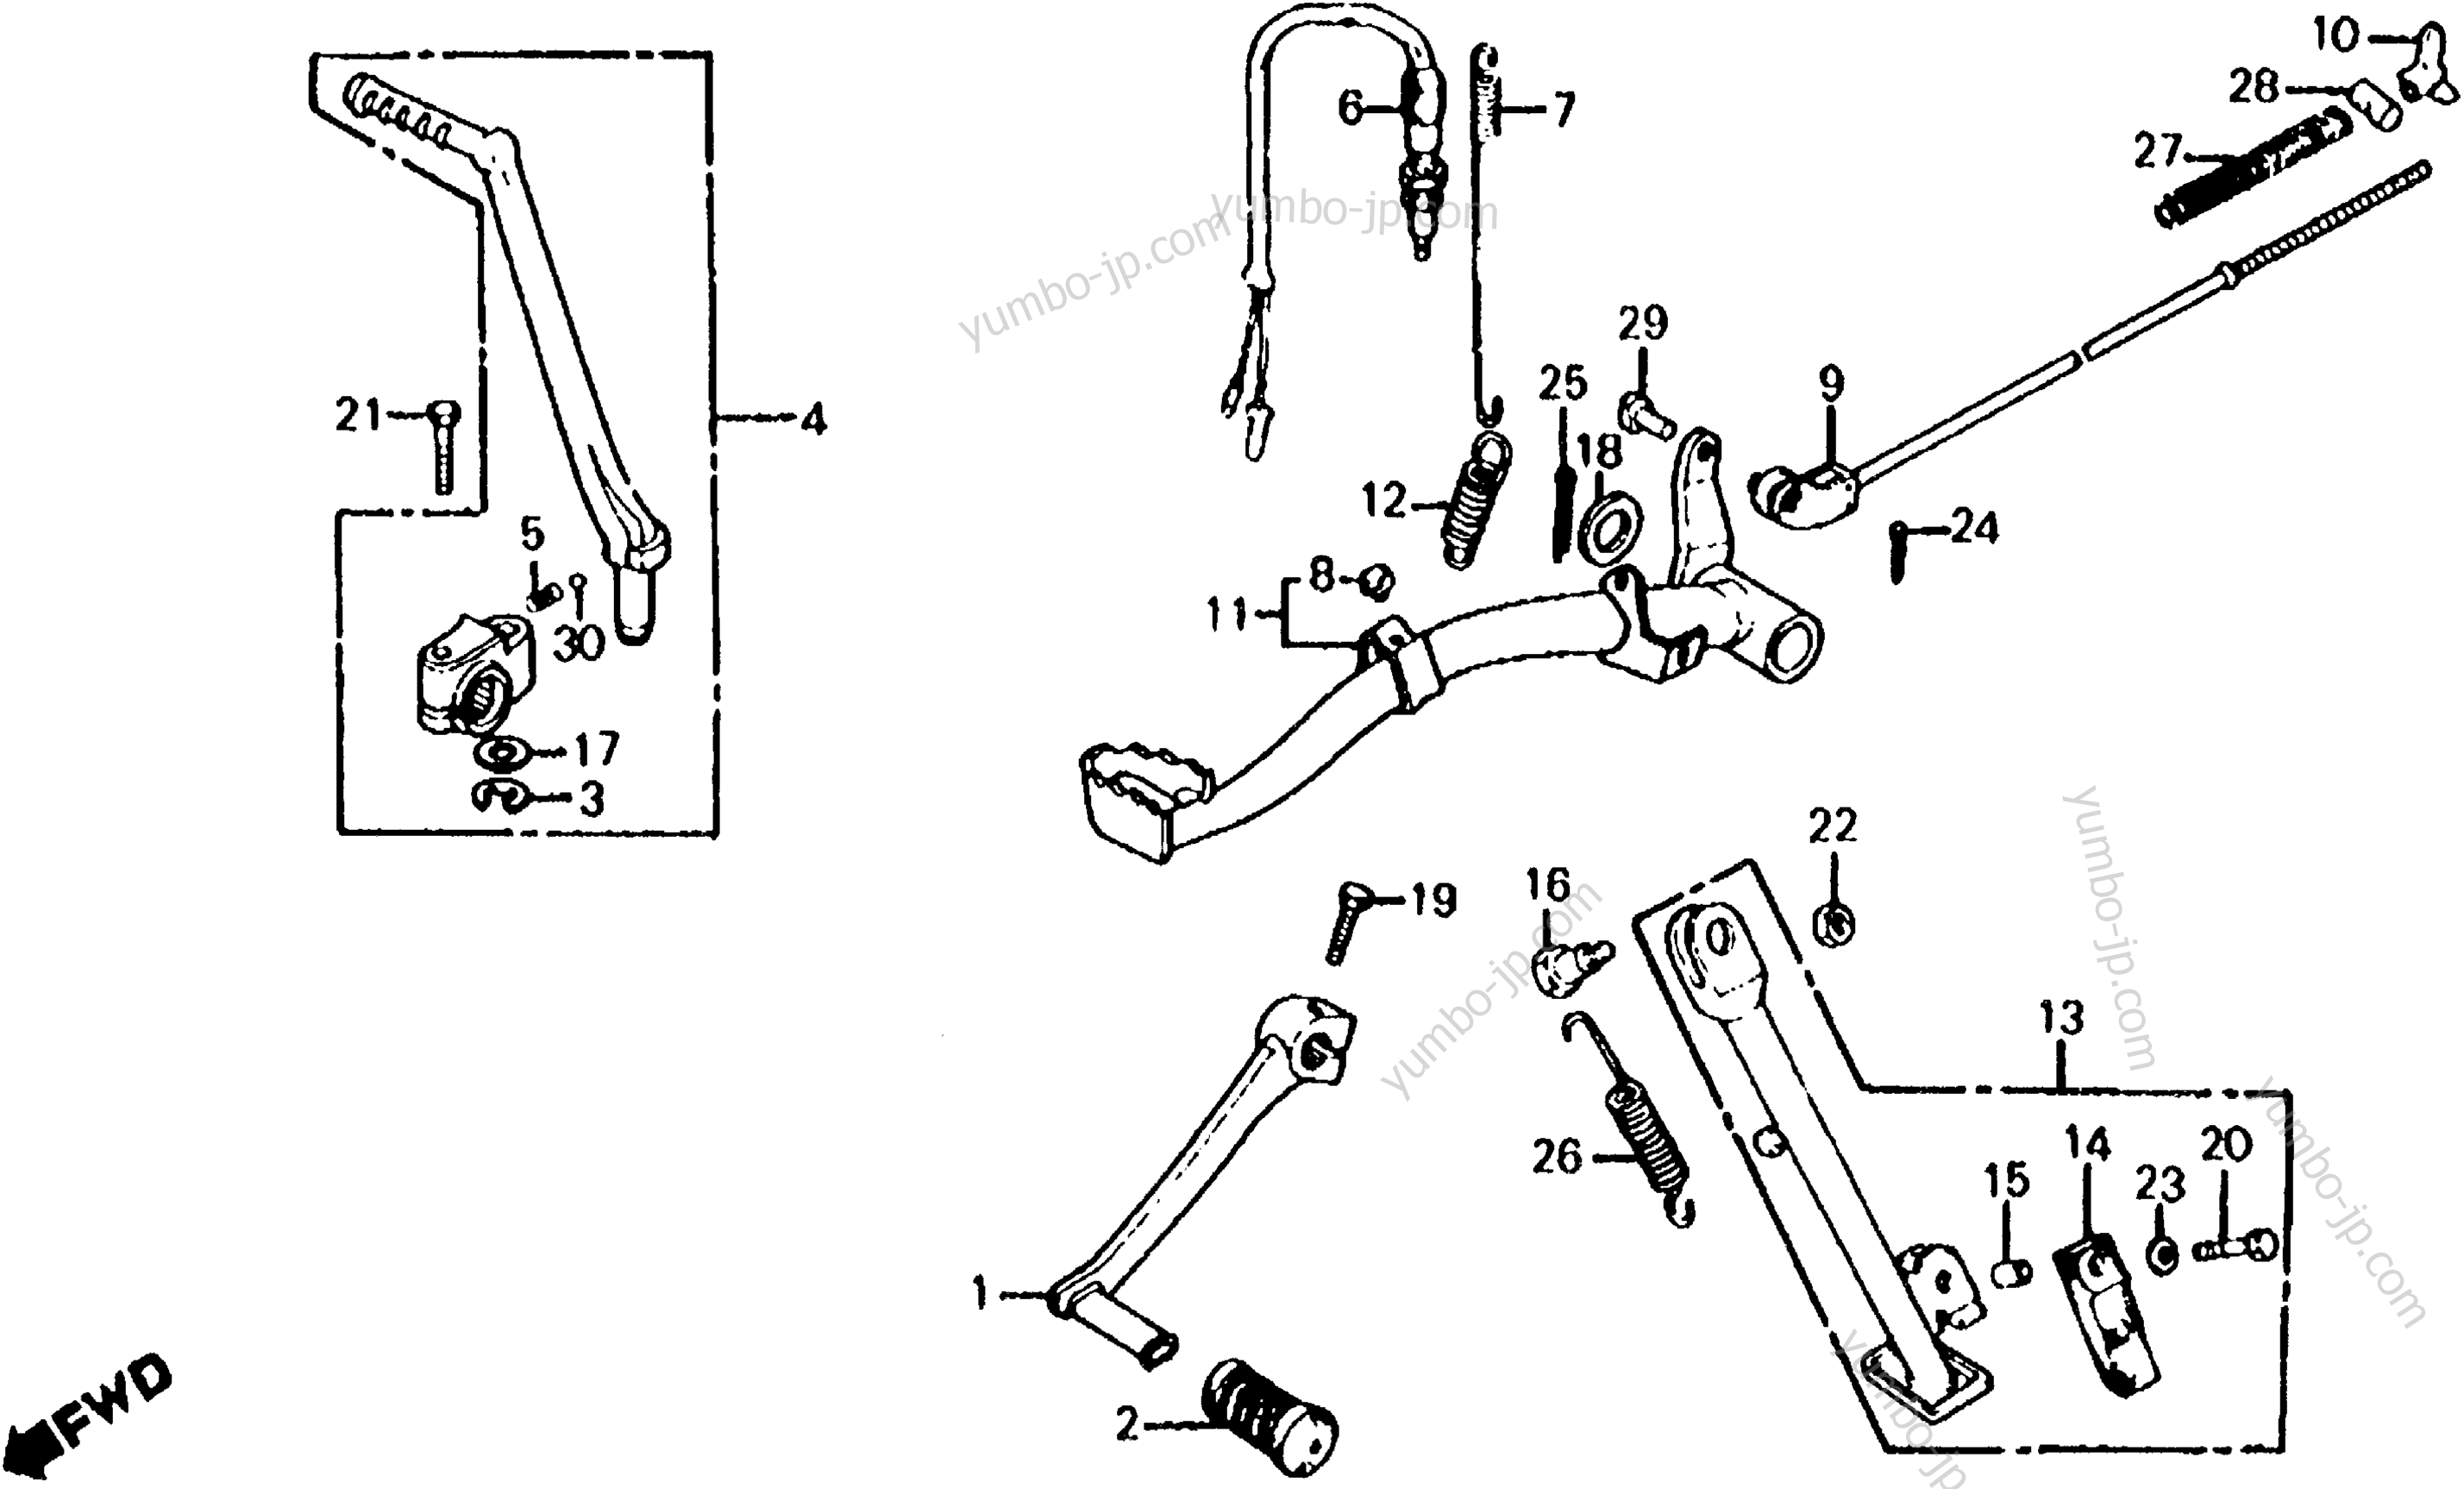 BRAKE PEDAL / GEARSHIFT PEDAL / KICK STARTER ARM for motorcycles HONDA XL100S A 1982 year